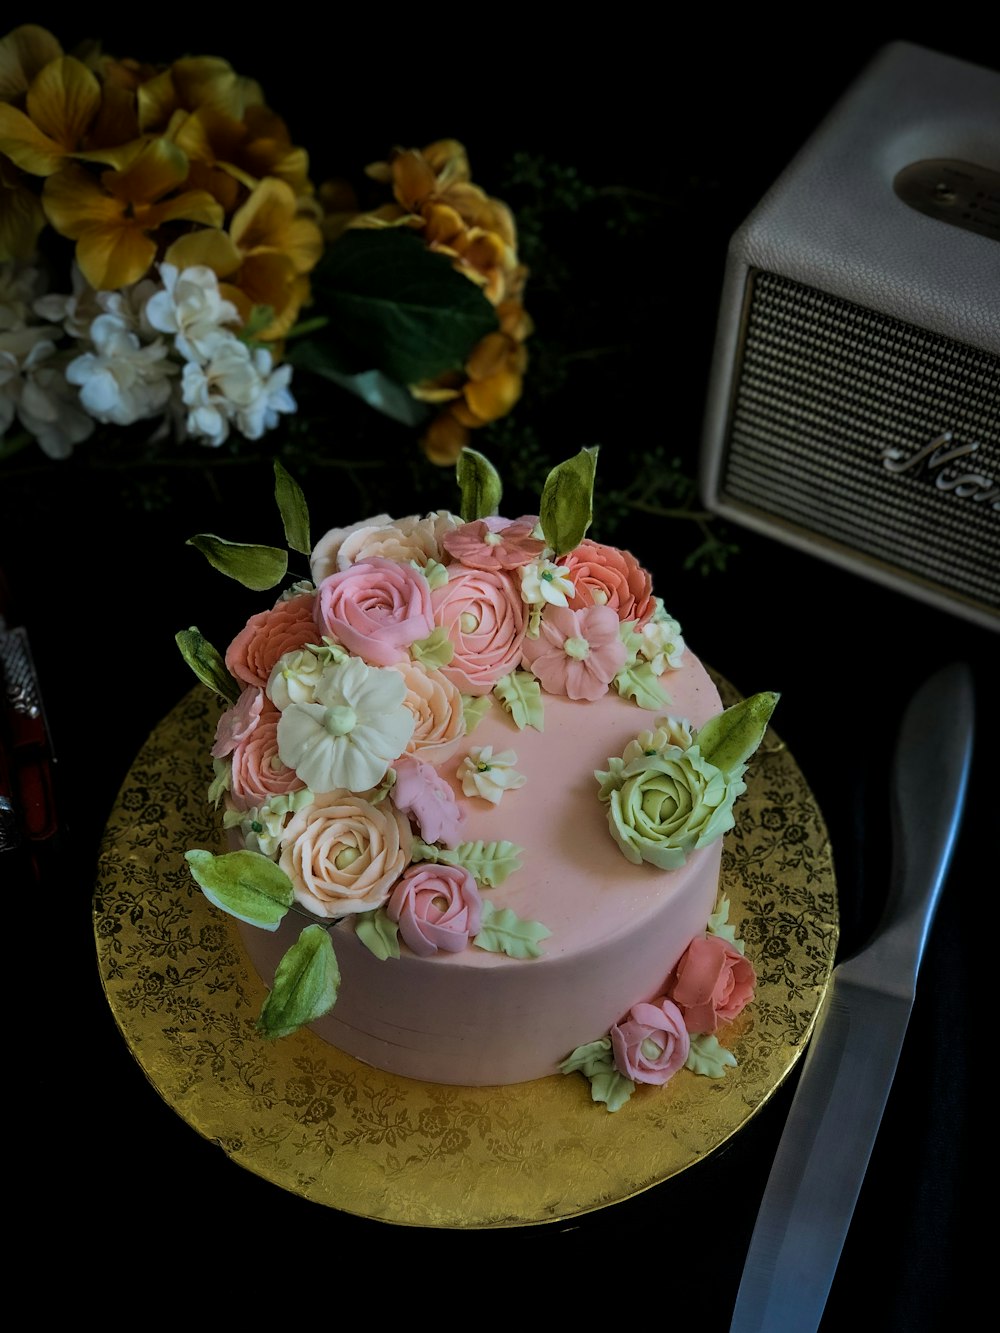 Pink and green floral cake photo – Free Cake Image on Unsplash